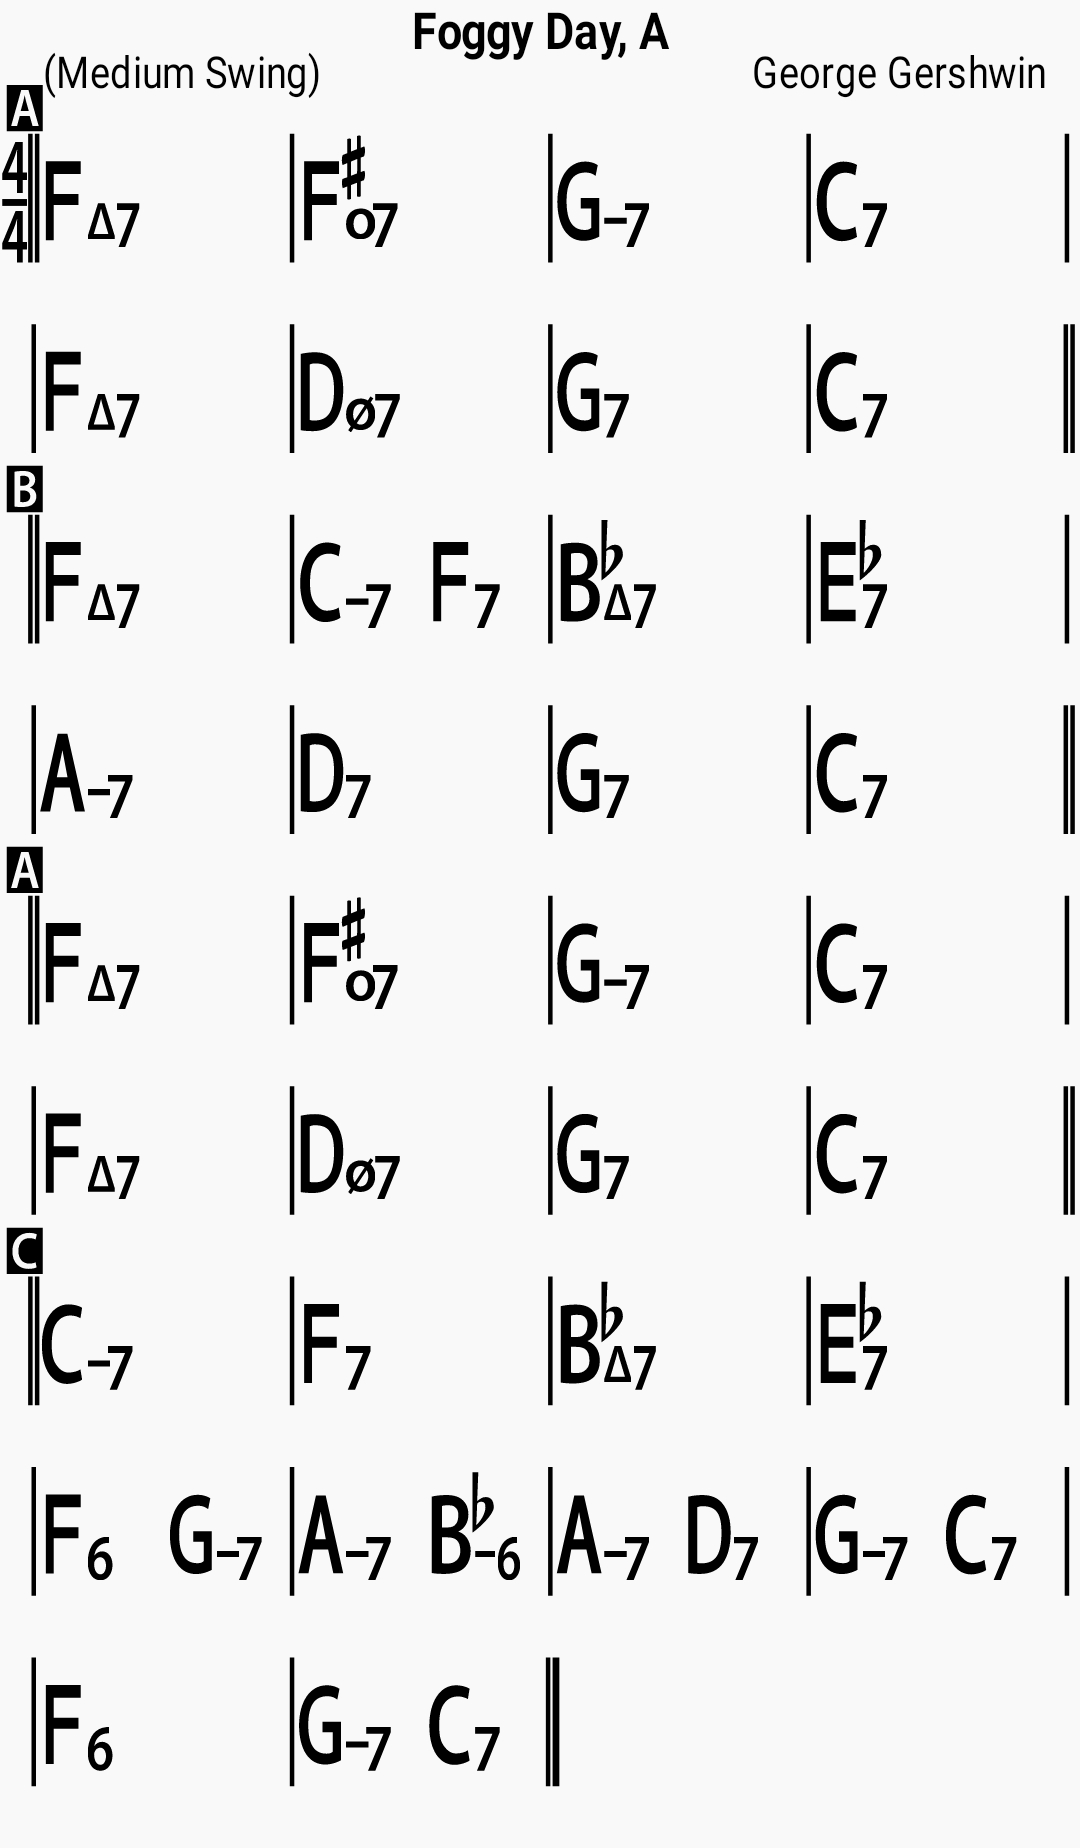 Chord chart for the jazz standard A Foggy Day